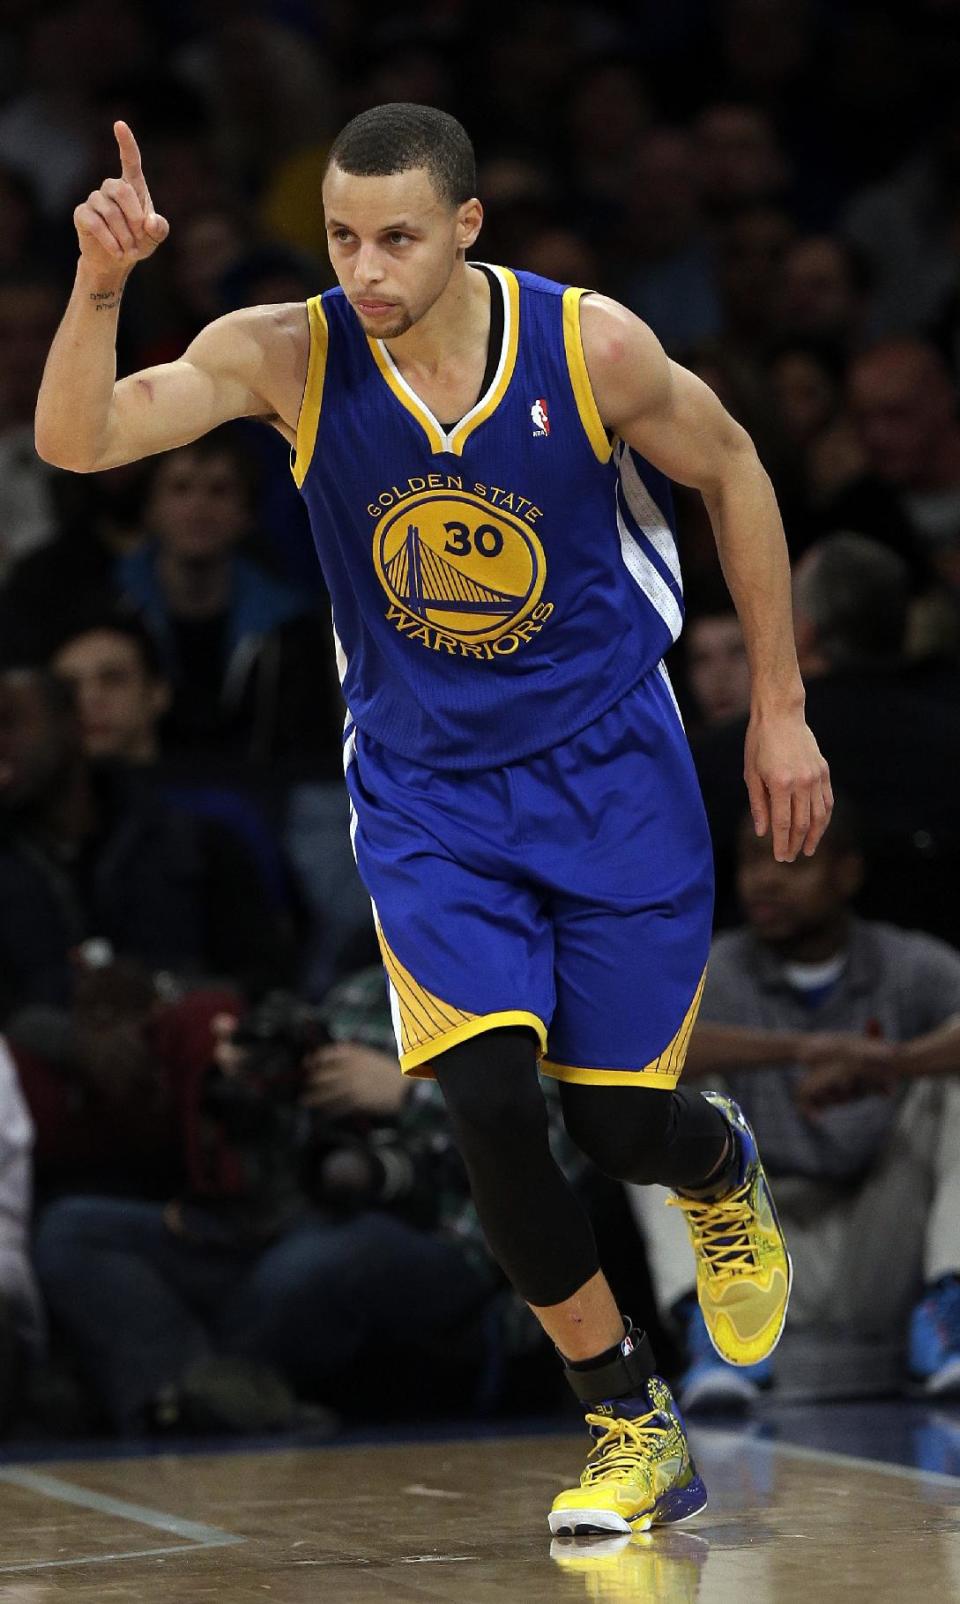 Golden State Warriors' Stephen Curry (30) gestures after scoring a 3-point basket during the first half of an NBA basketball game against the New York Knicks, Friday, Feb. 28, 2014, in New York. (AP Photo/Frank Franklin II)